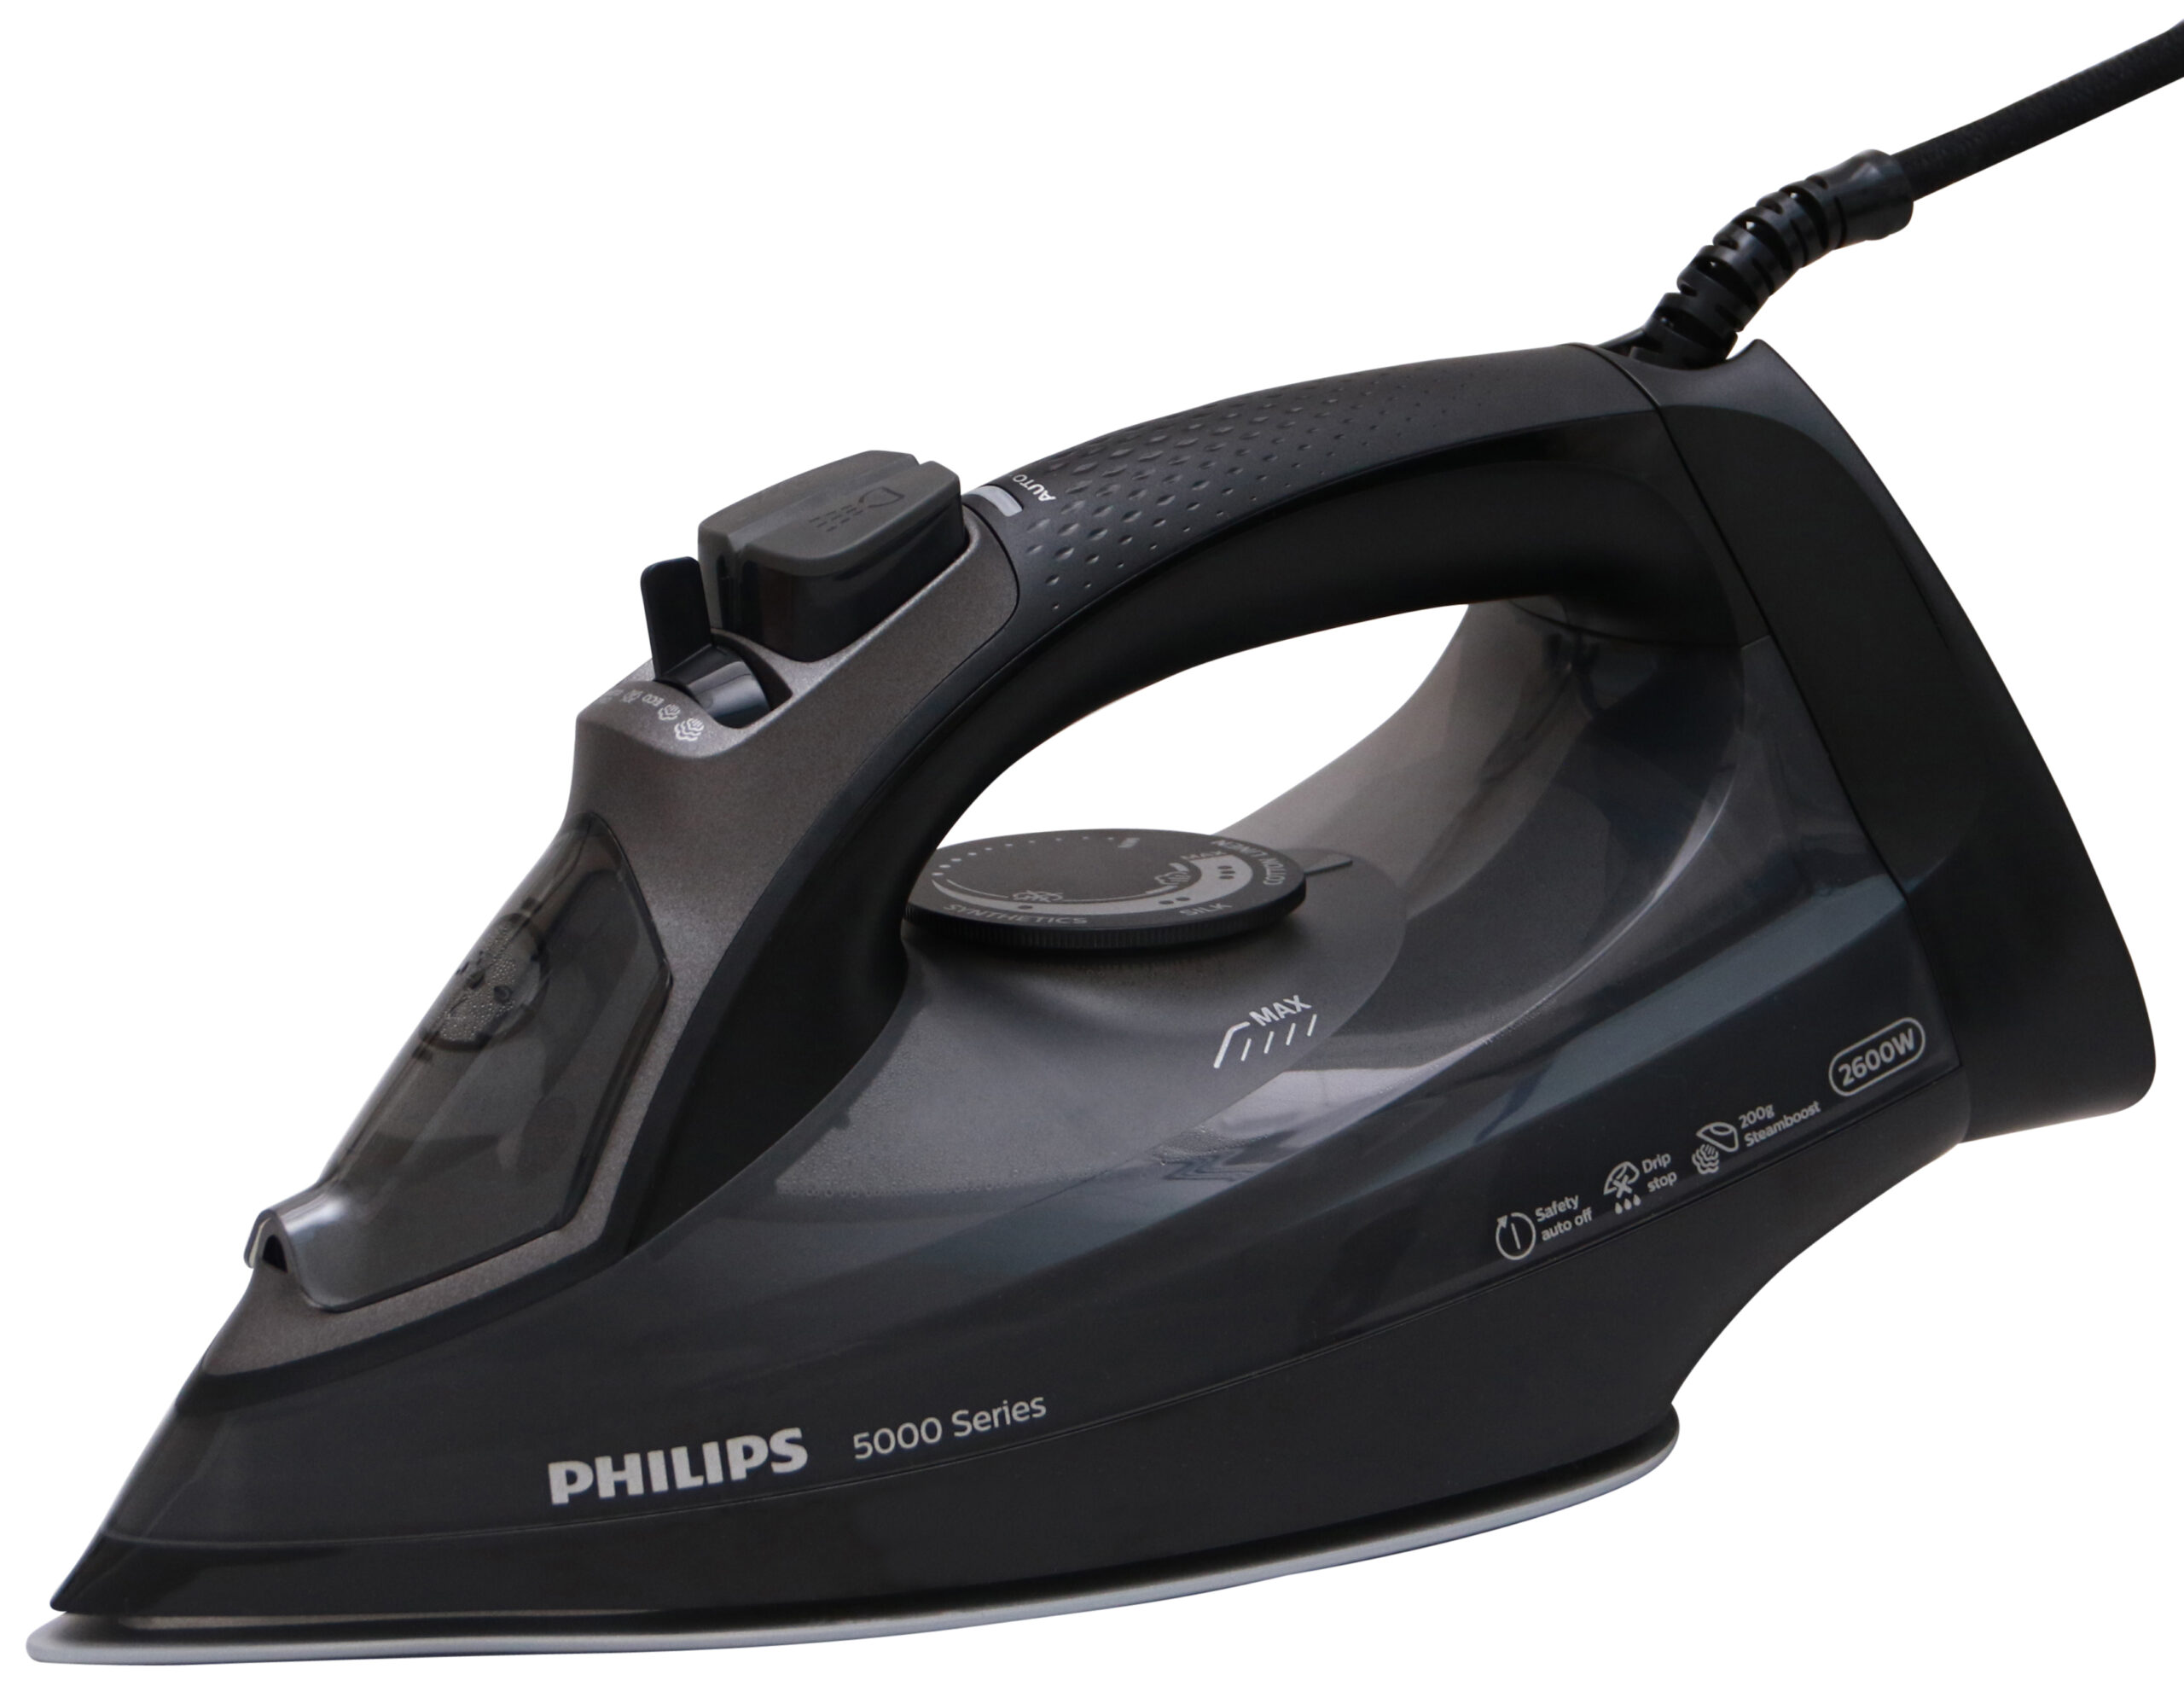 Philips DST5040/80 5000 Series